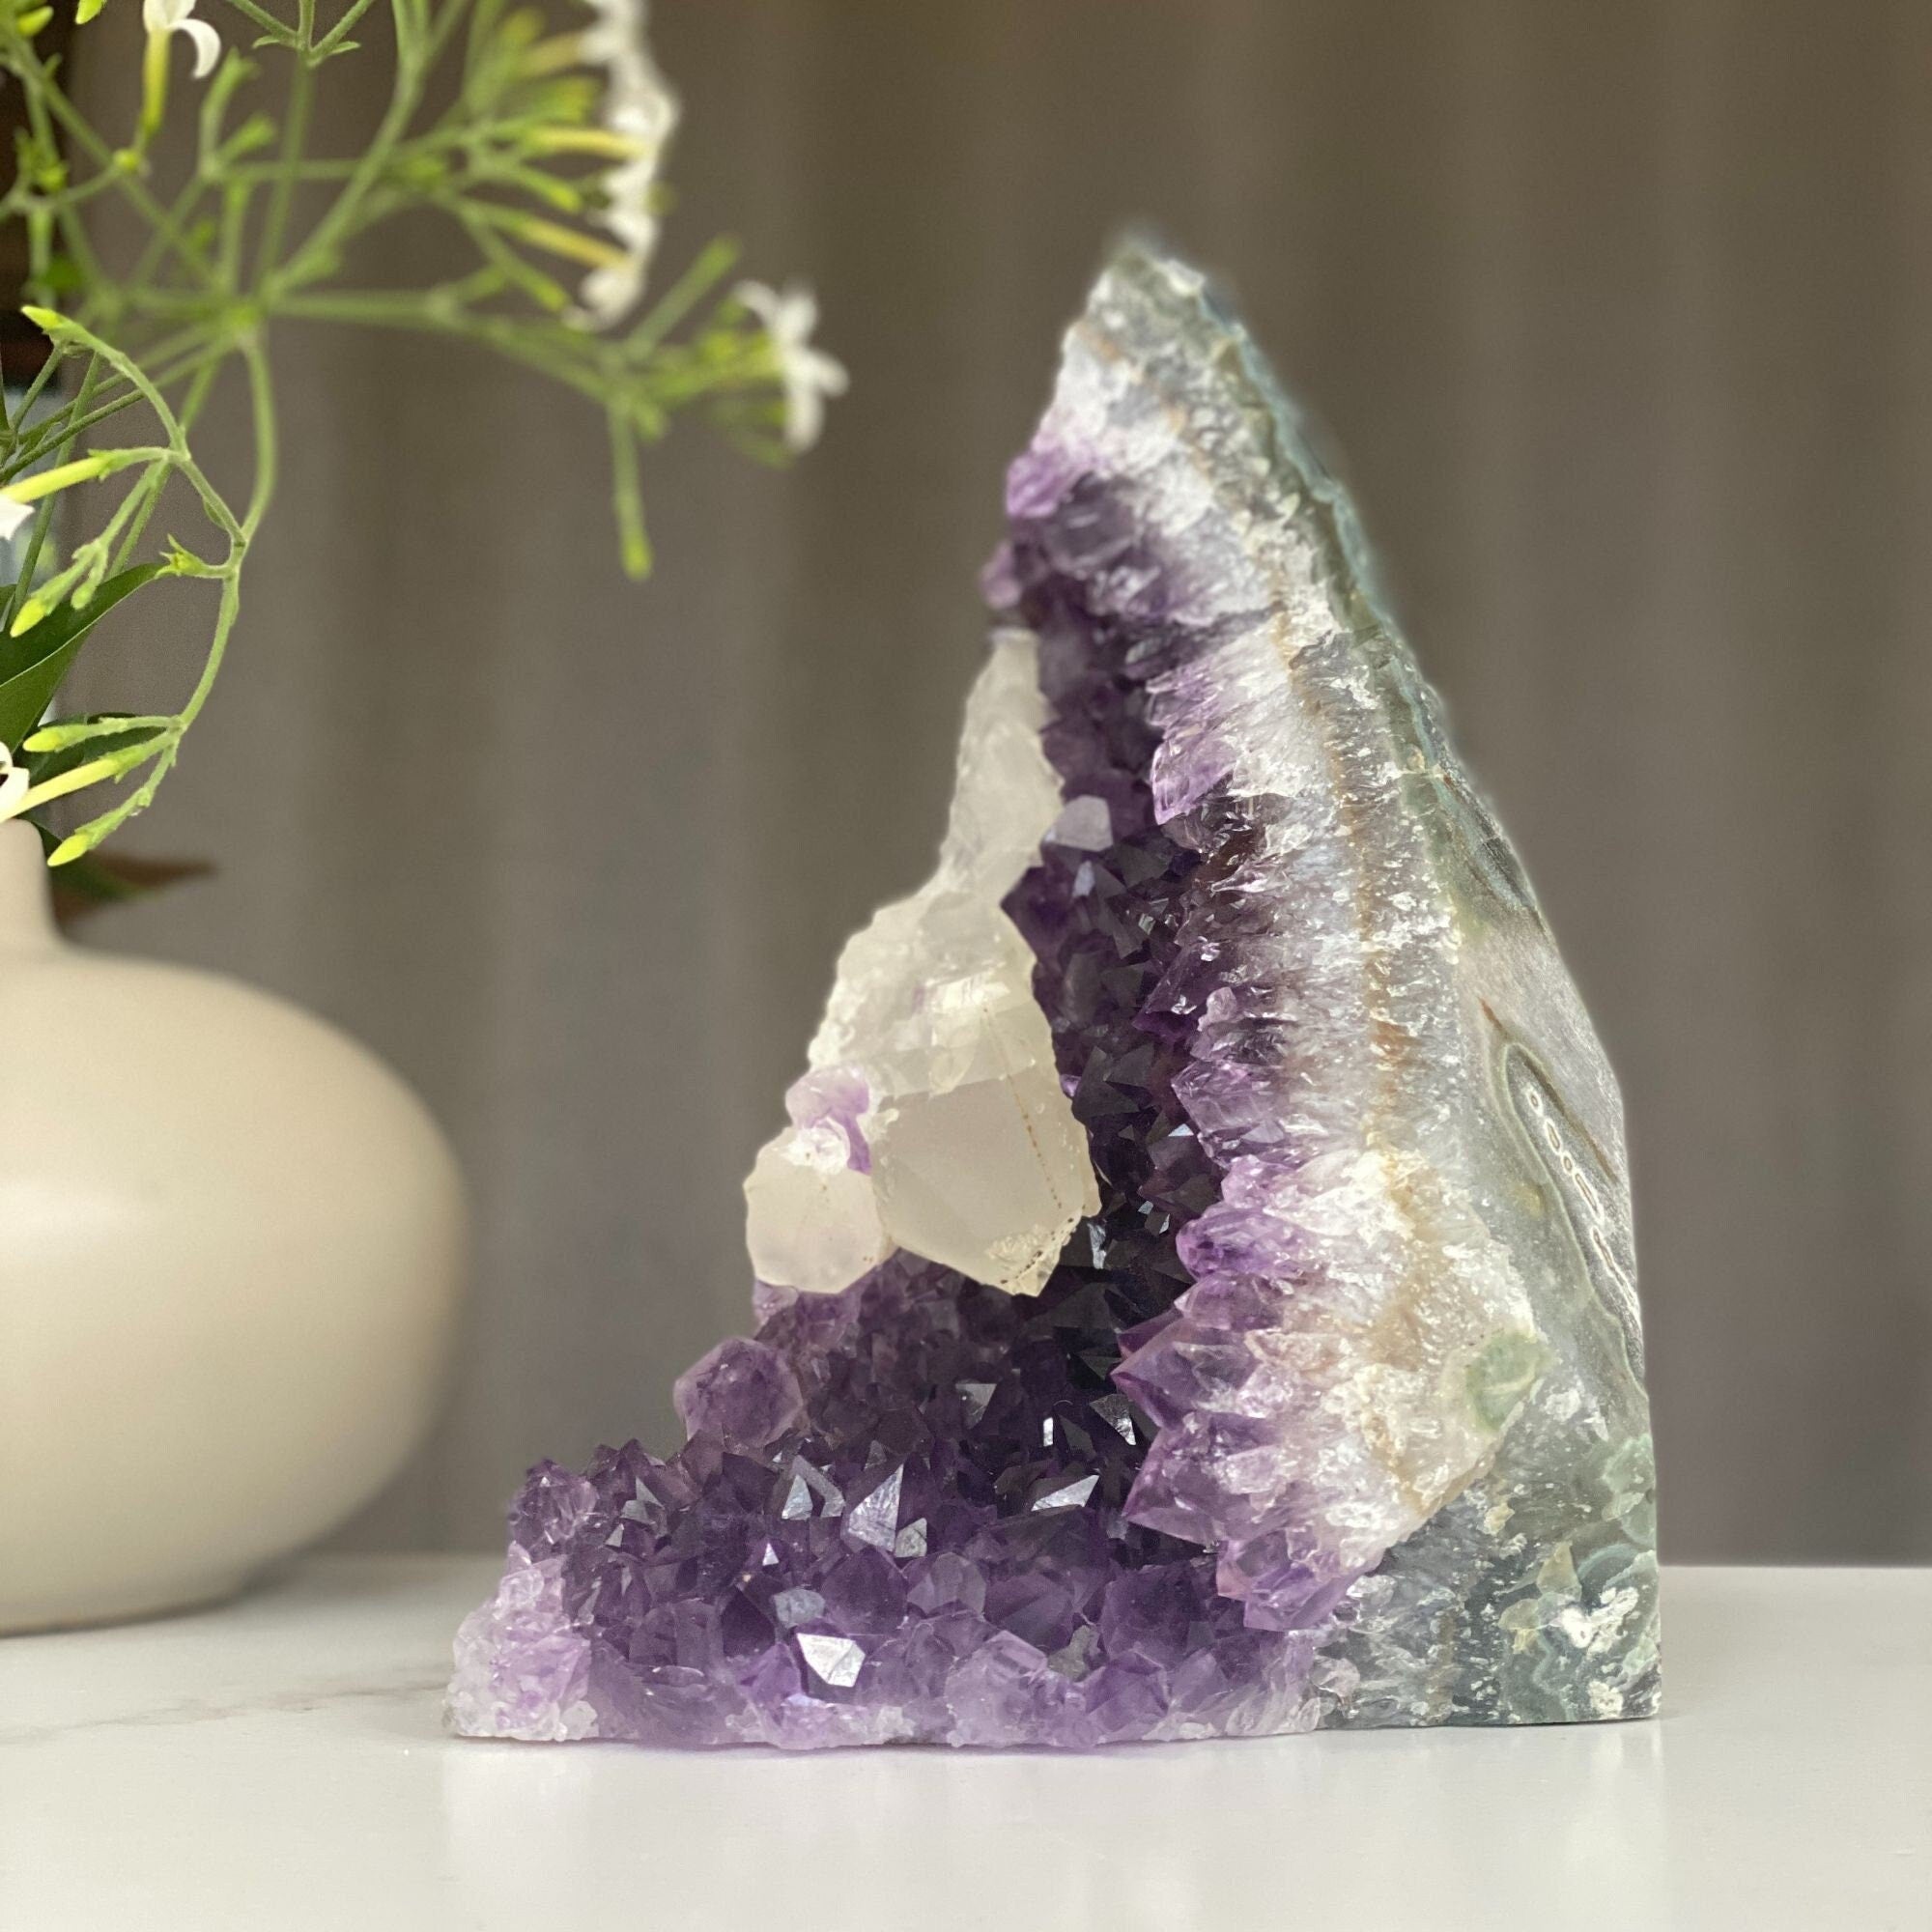 Amethyst with calcite, amethyst cathedral with calcite formations